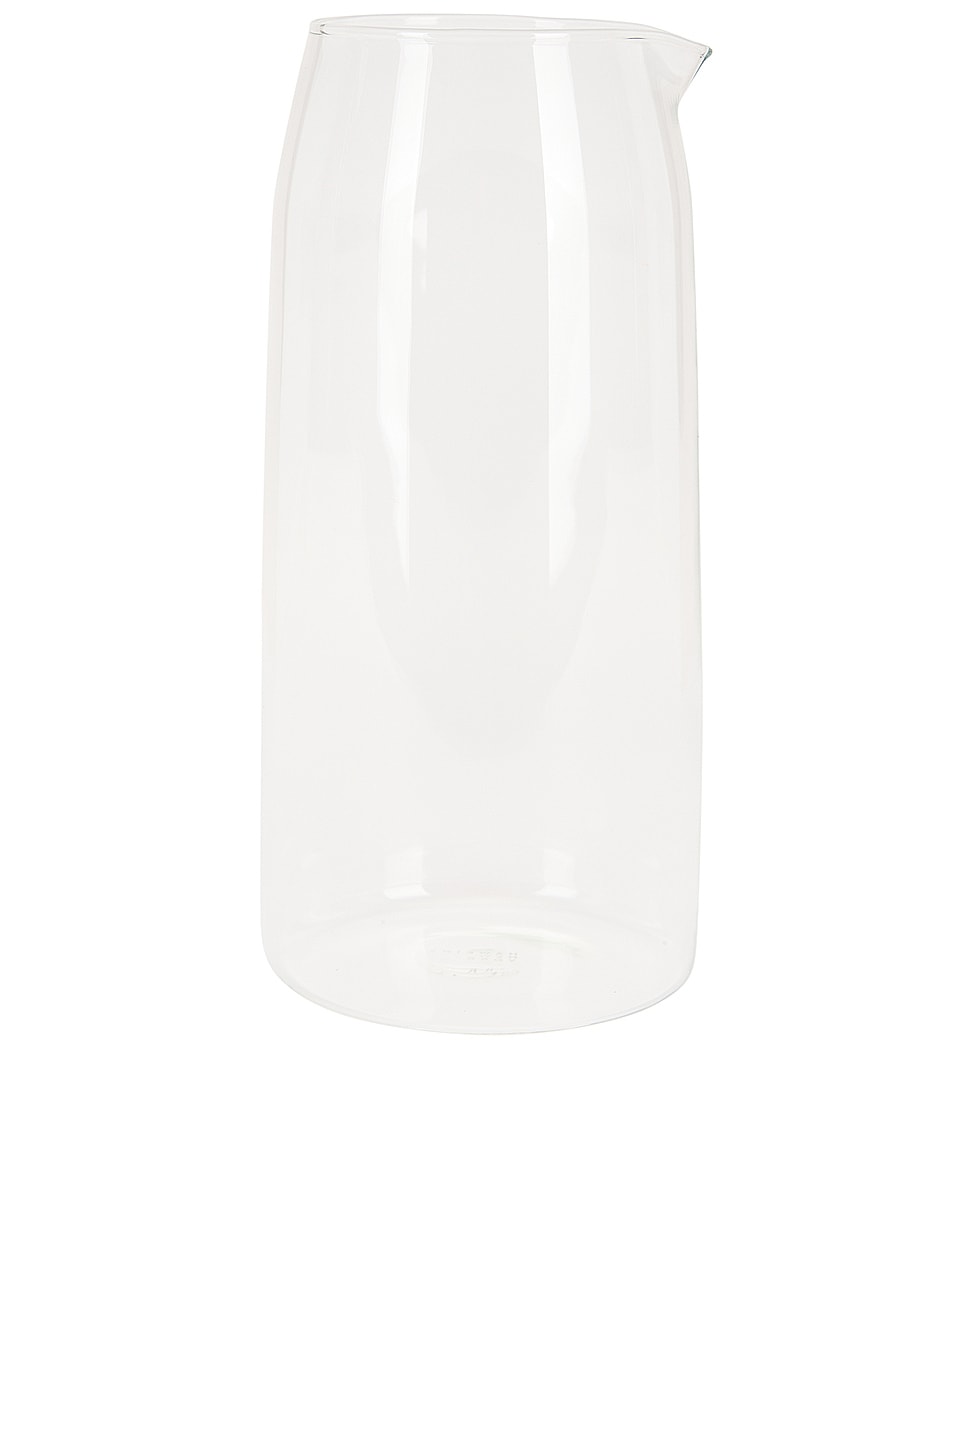 Image 1 of HAWKINS NEW YORK Essential Pitcher in Clear